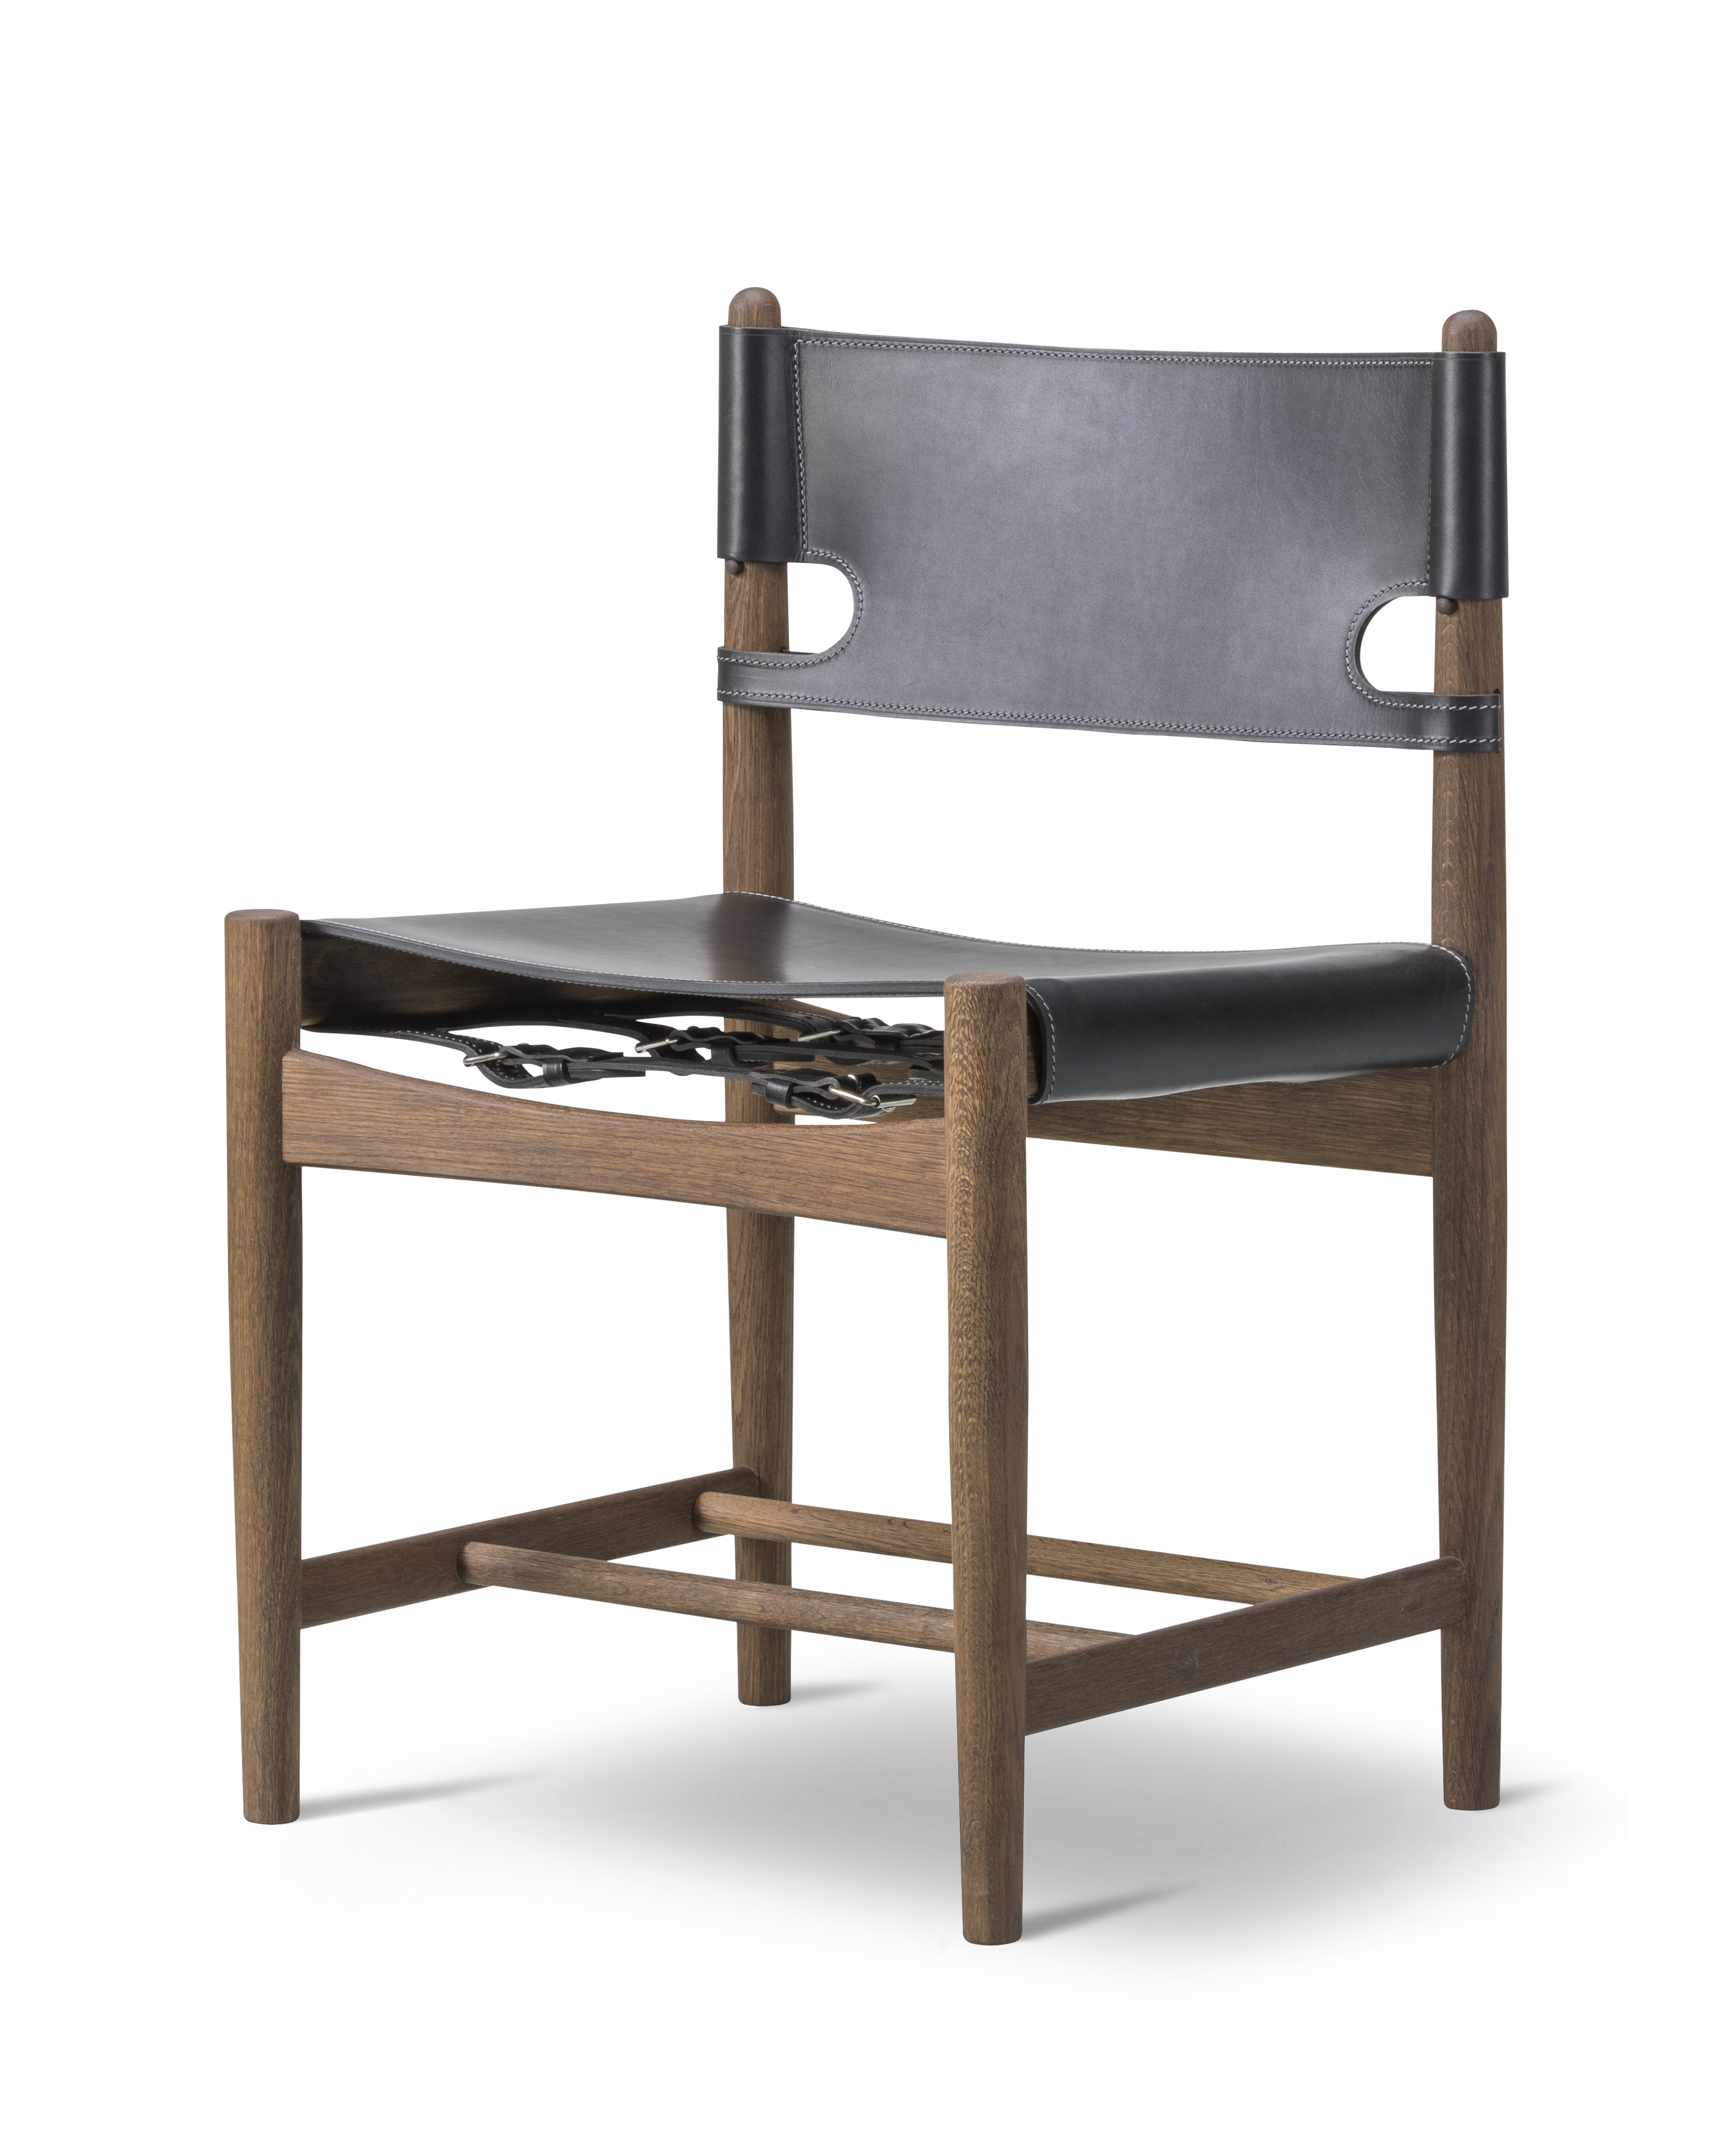 The Spanish Dining Chair - Black leather / Smoked oak